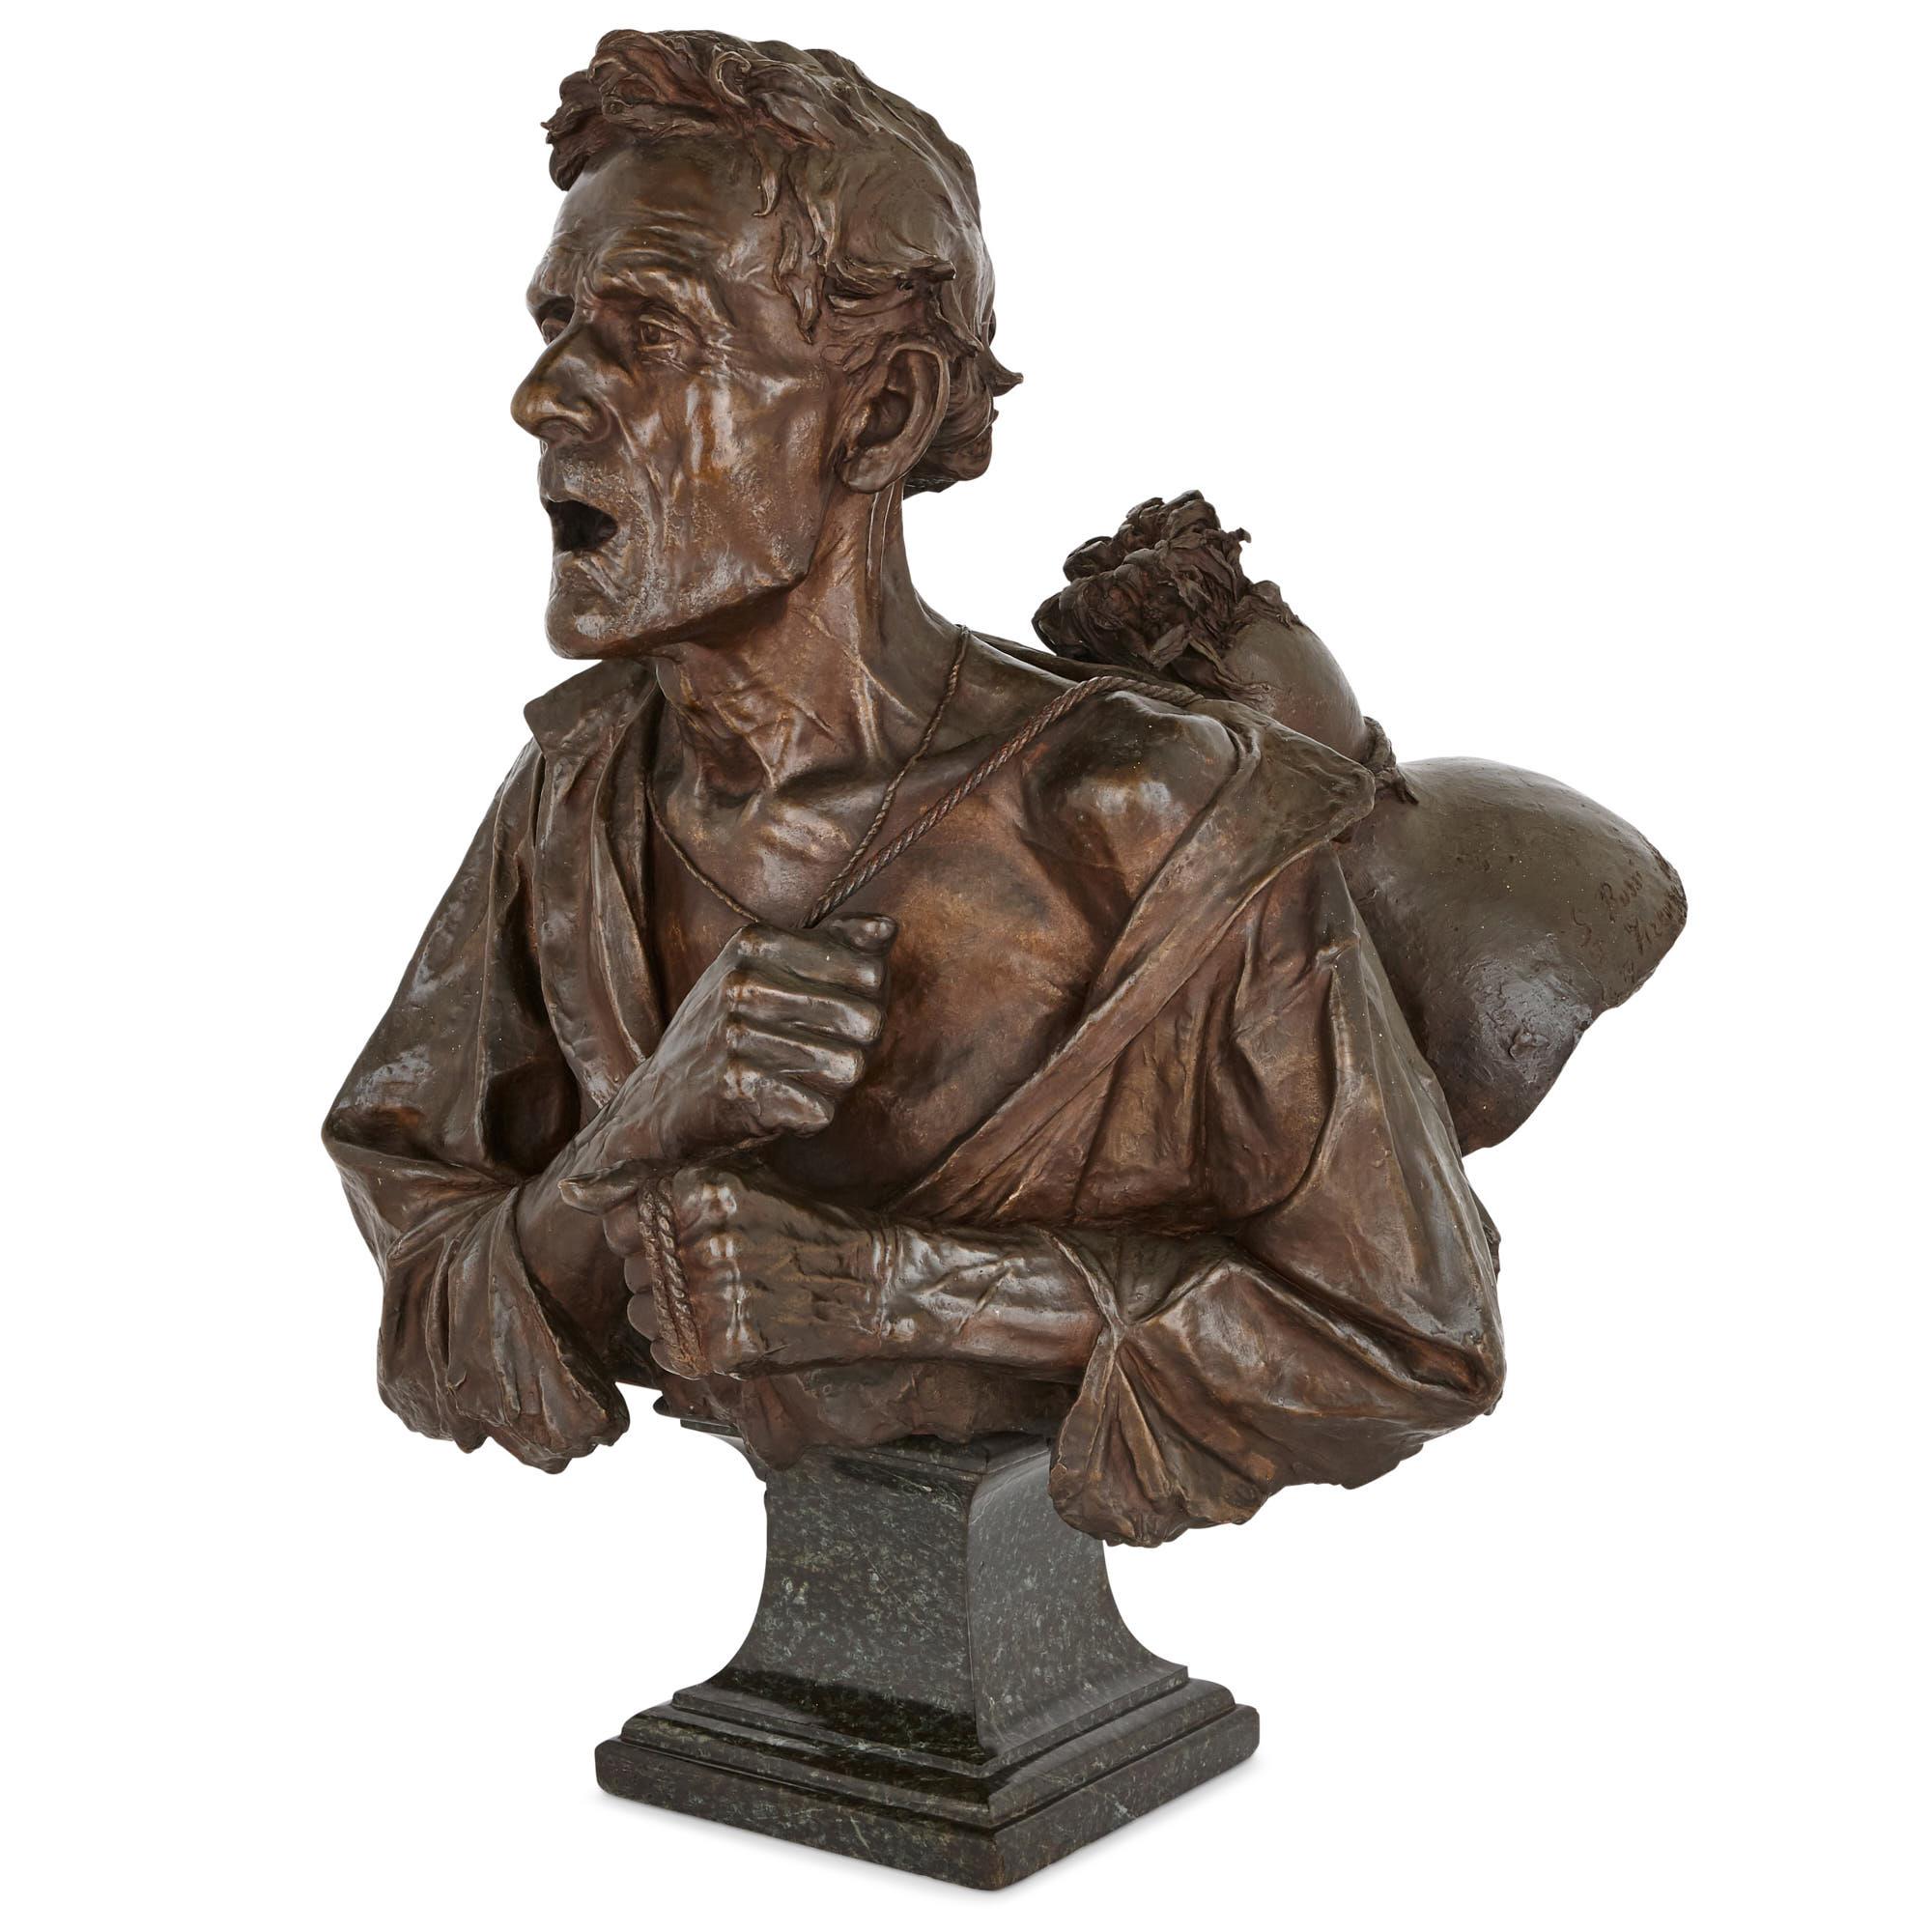 This strikingly naturalistic bronze sculpture was created in Florence in 1895. The bust depicts an elderly man, most likely a farm worker, carrying a heavy sack of grain over his shoulder. He wears an old slightly ragged shirt which is open at his